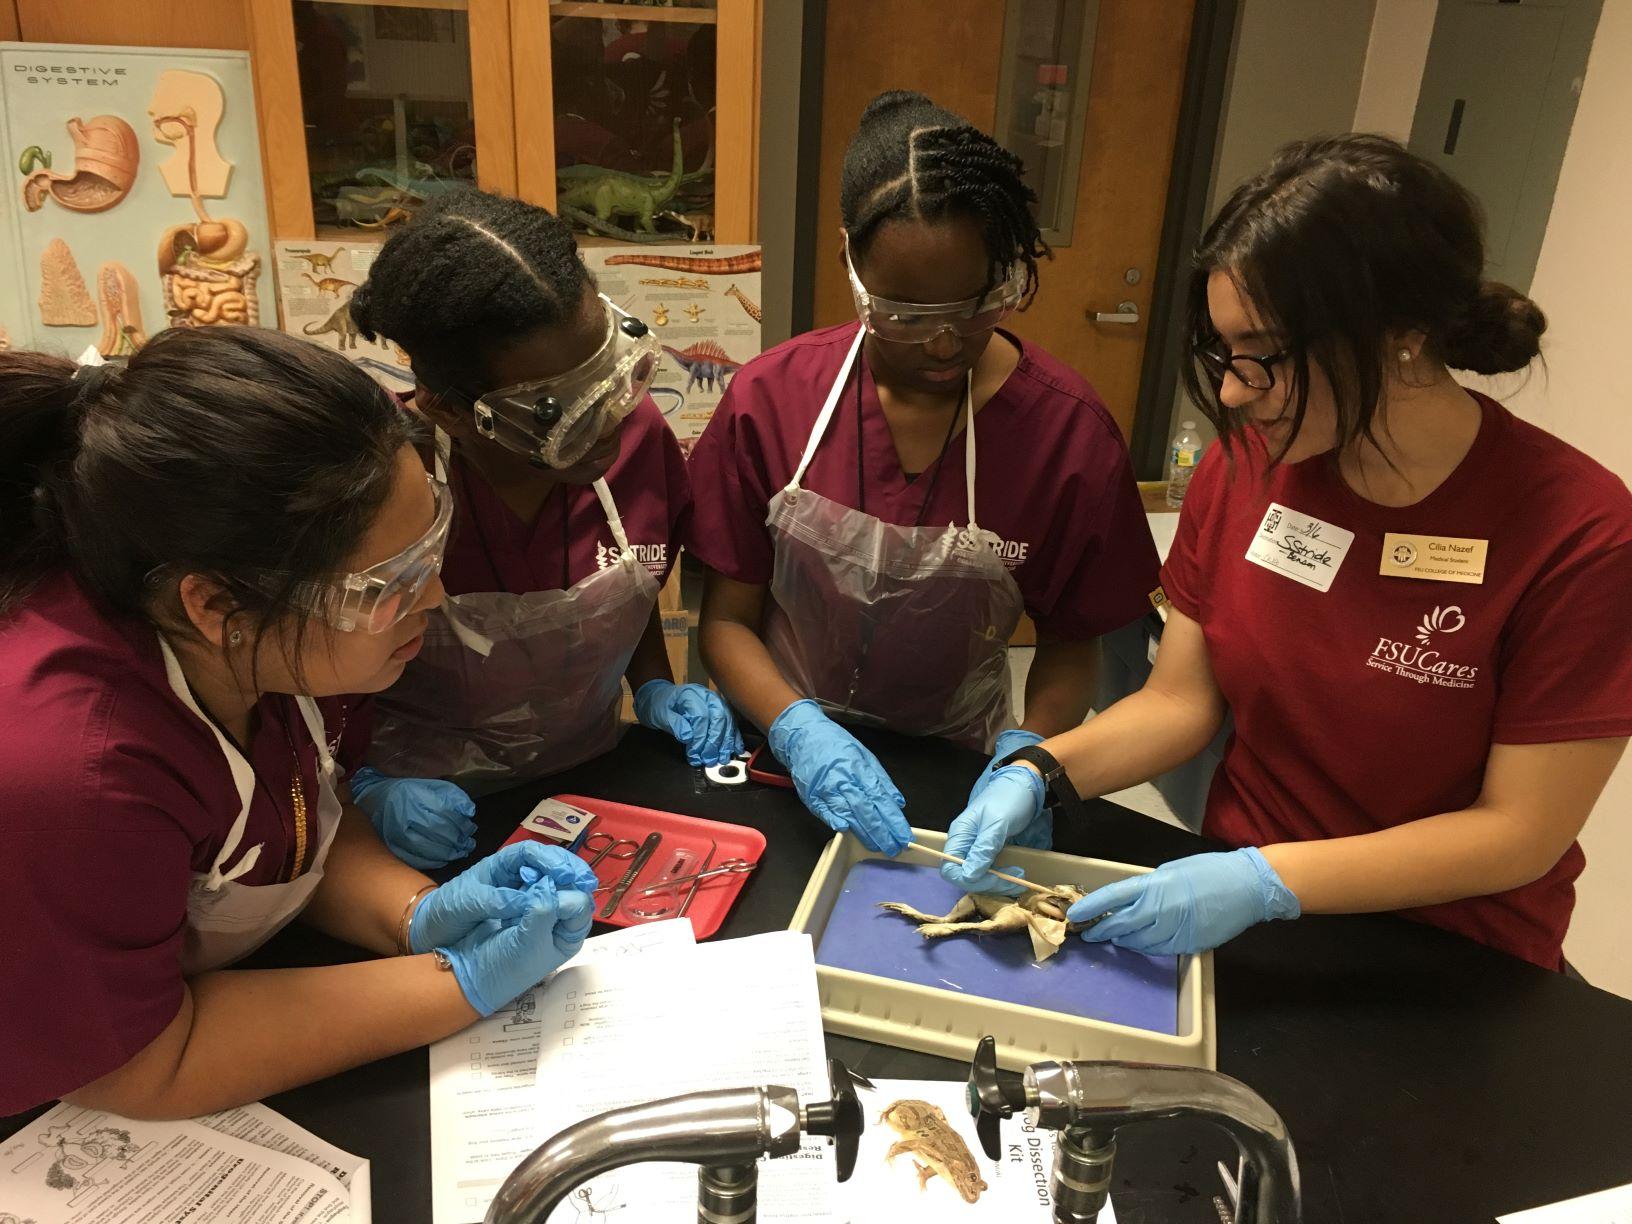 Students dissecting frogs